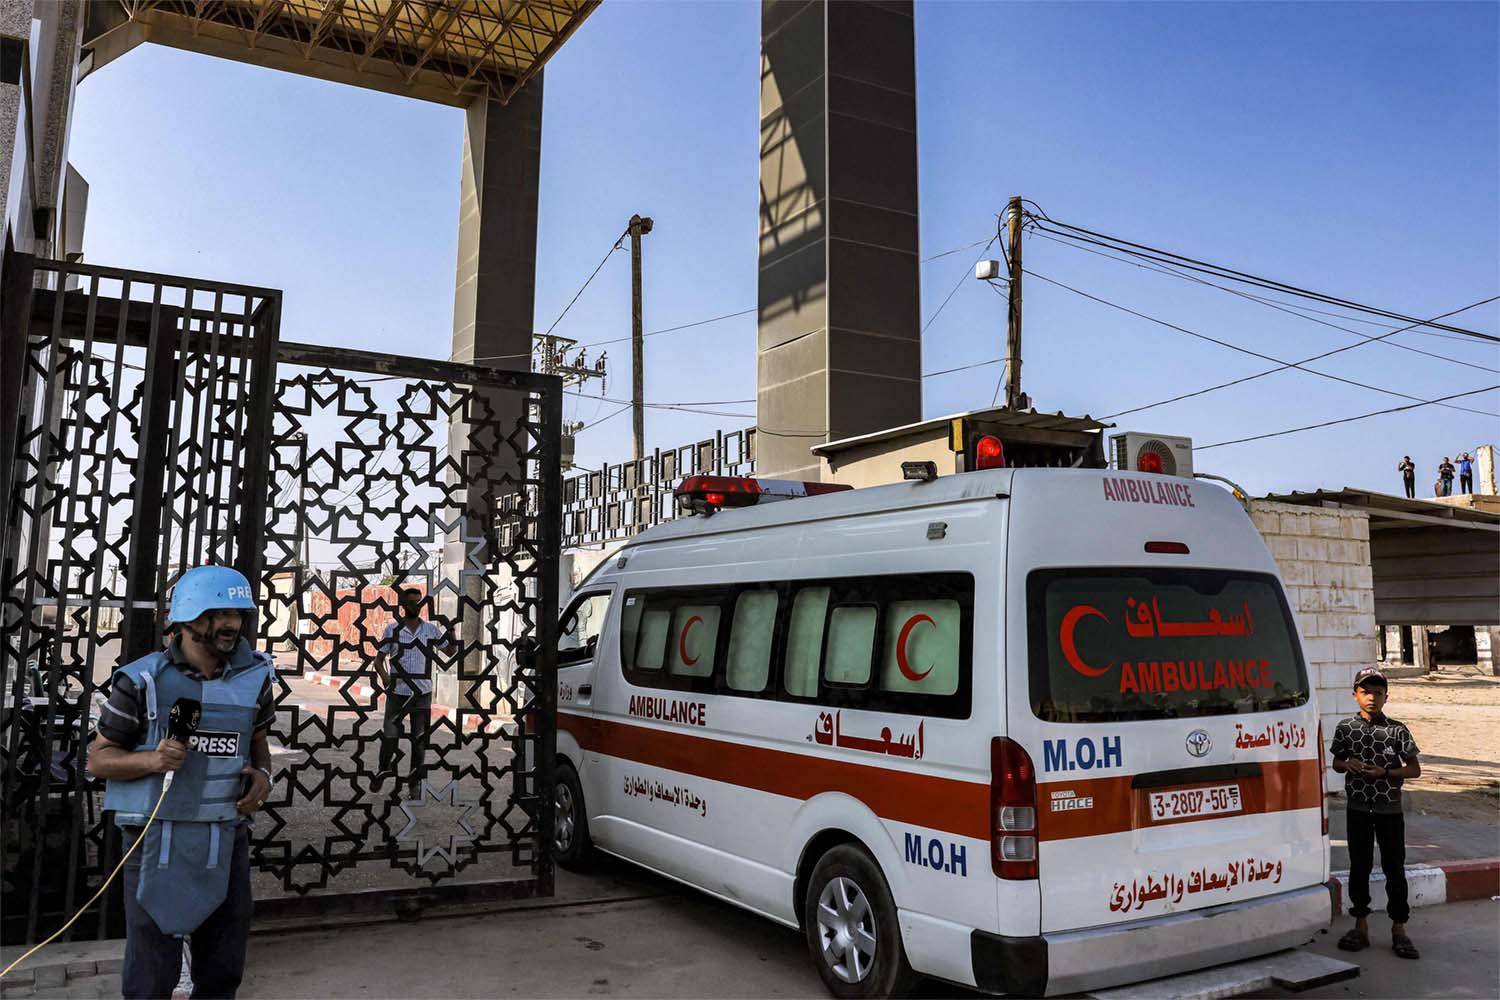 The Rafah crossing, controlled by Egypt, is the main entrance and exit point to Gaza from Egypt